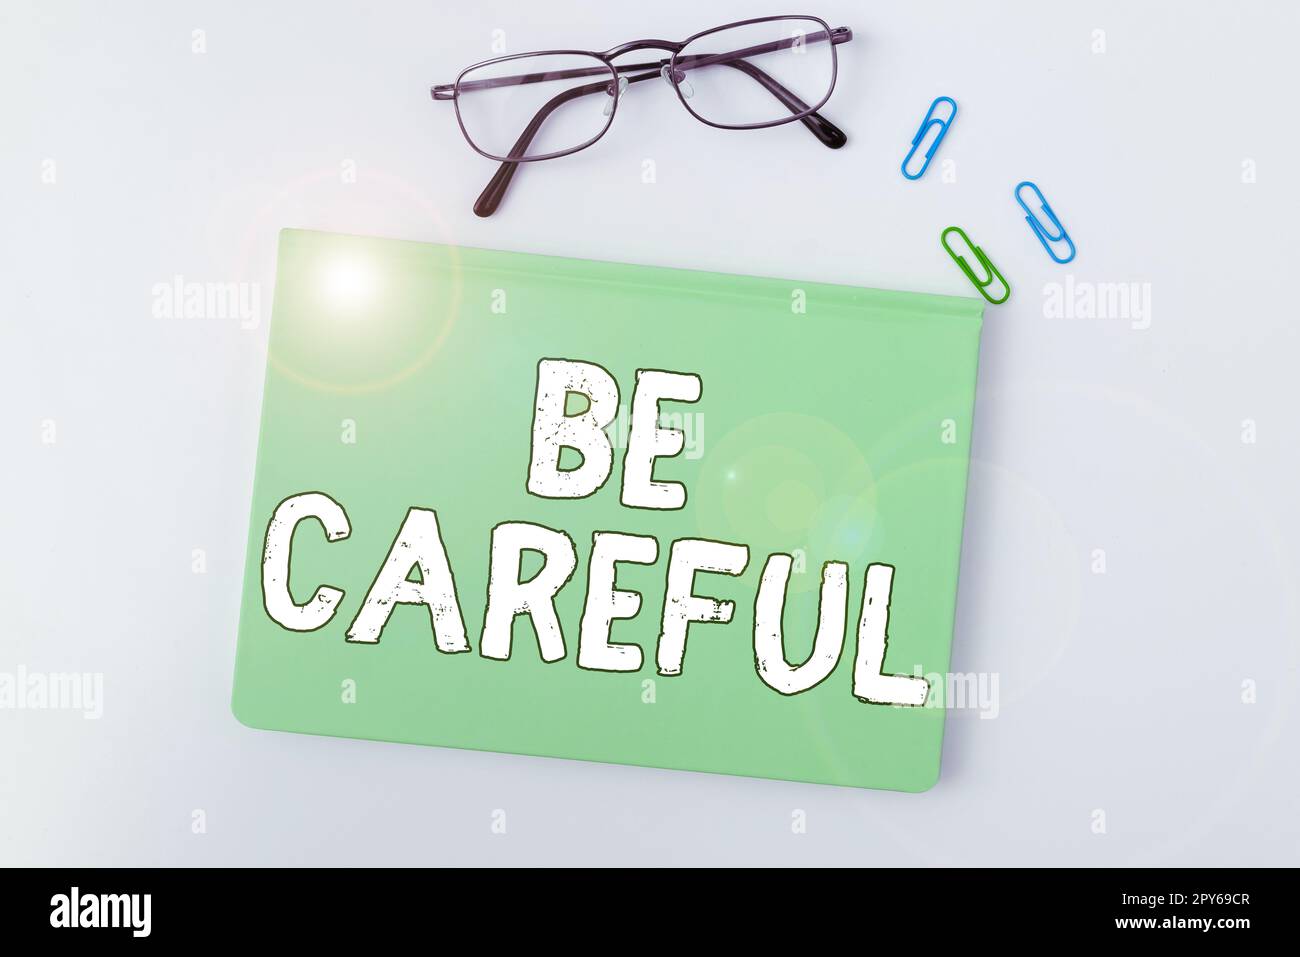 Inspiration showing sign Be Careful. Business showcase making sure of avoiding potential danger mishap or harm Stock Photo